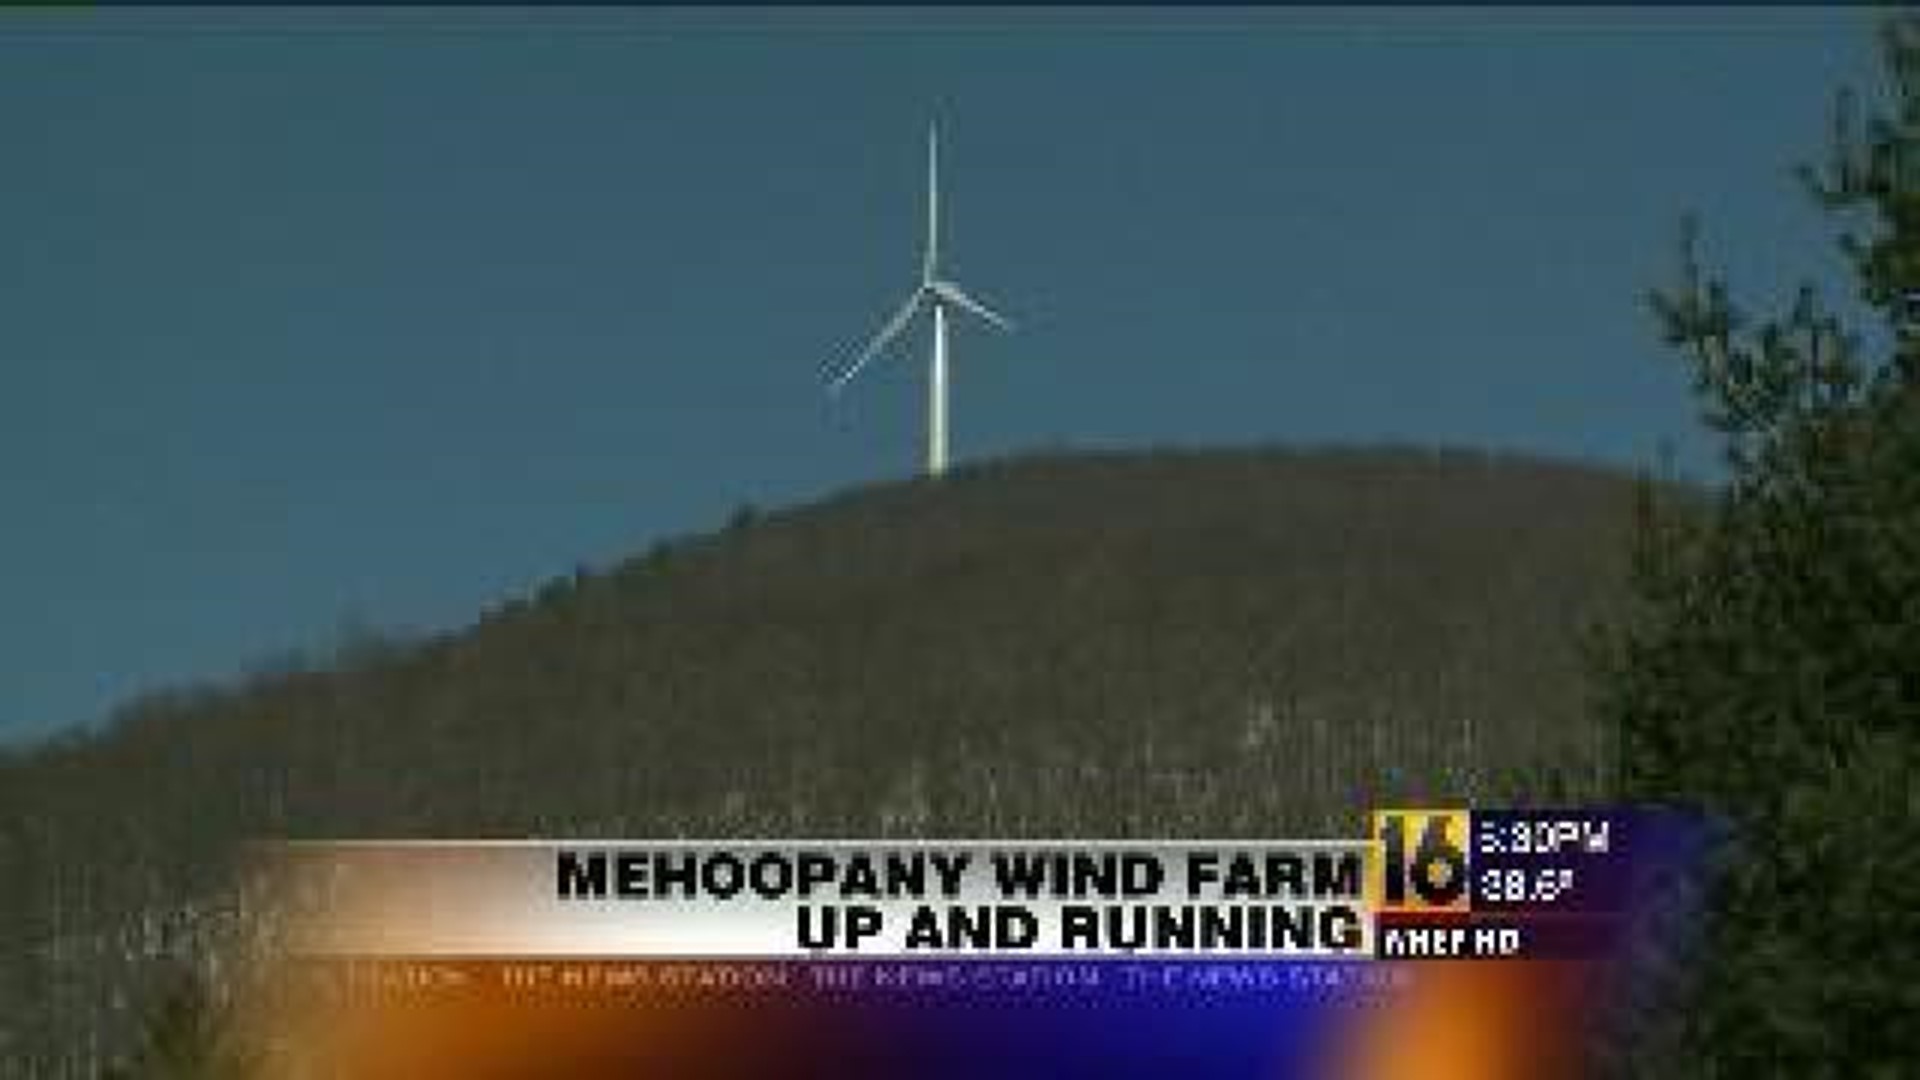 Mehoopany Wind Farm Up and Running